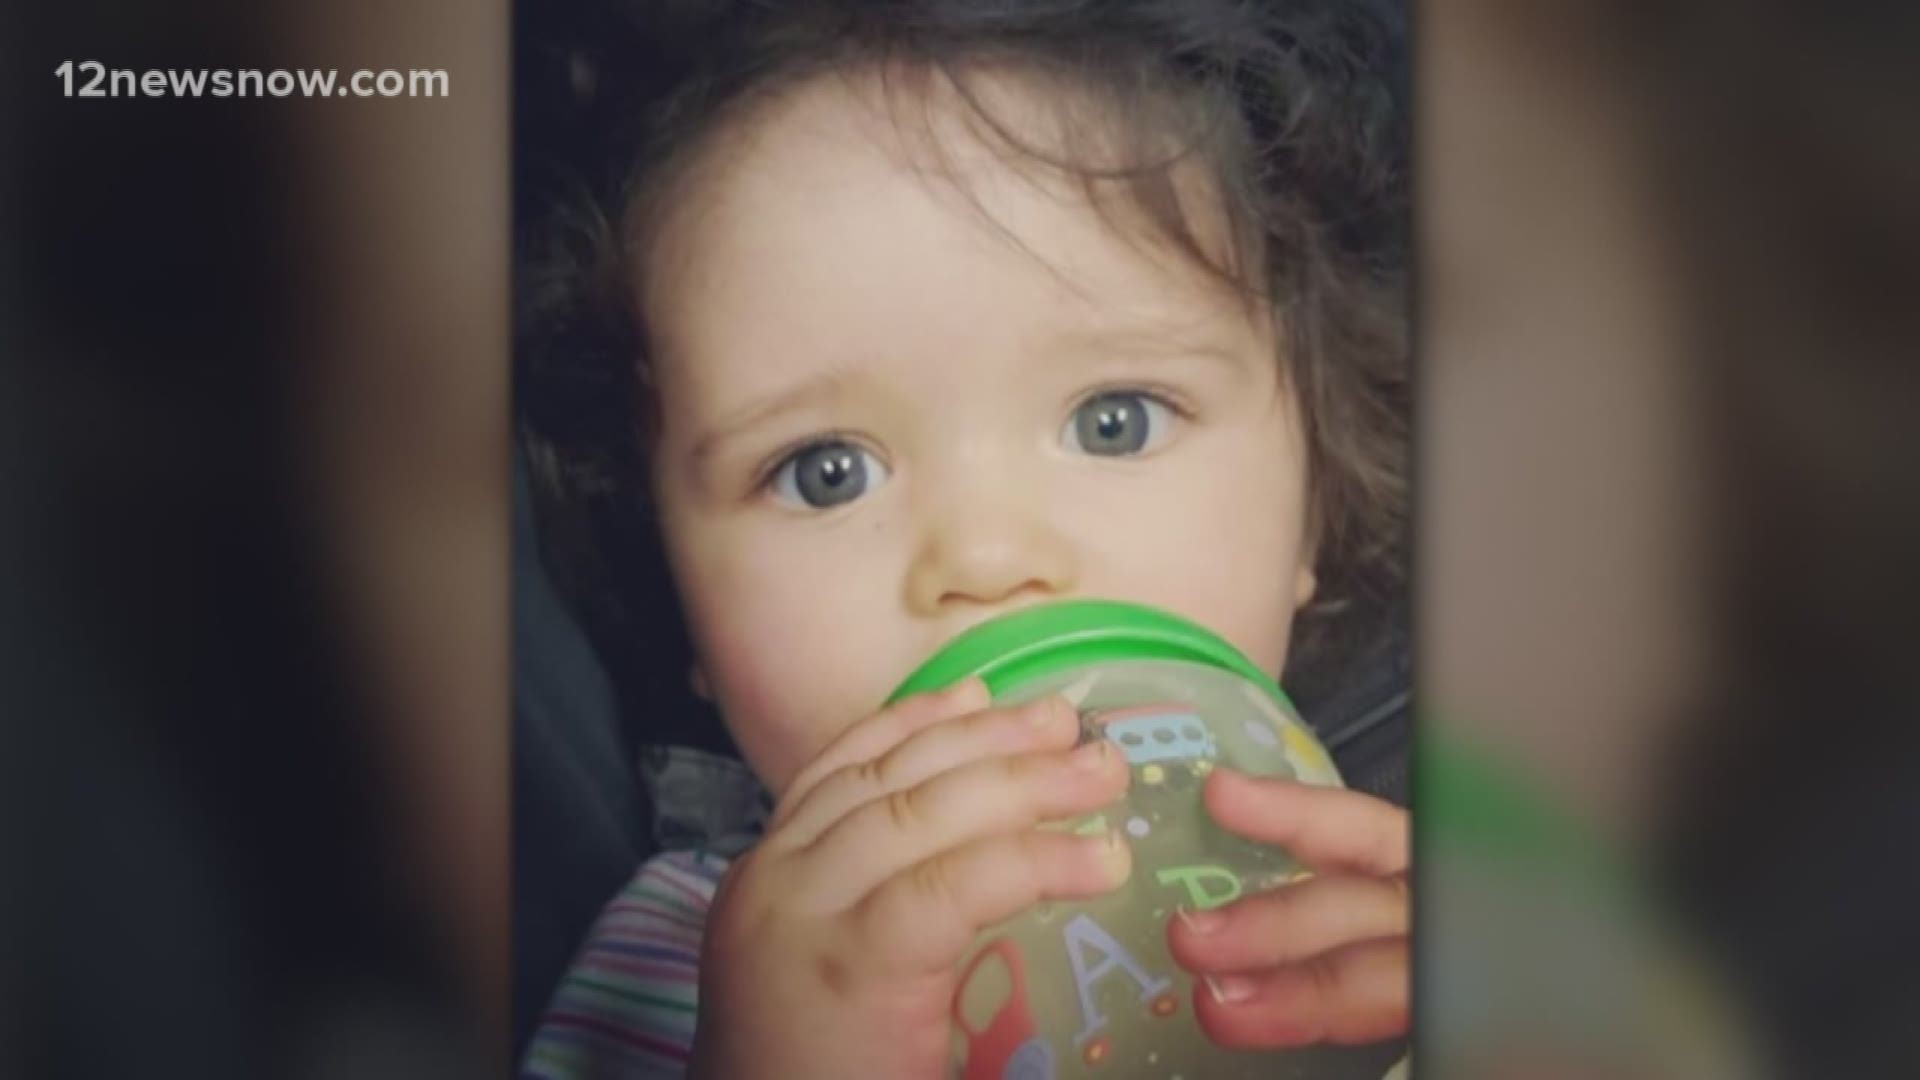 Family, friends, and first responders will honor the 2-year-old who was brutally killed last year